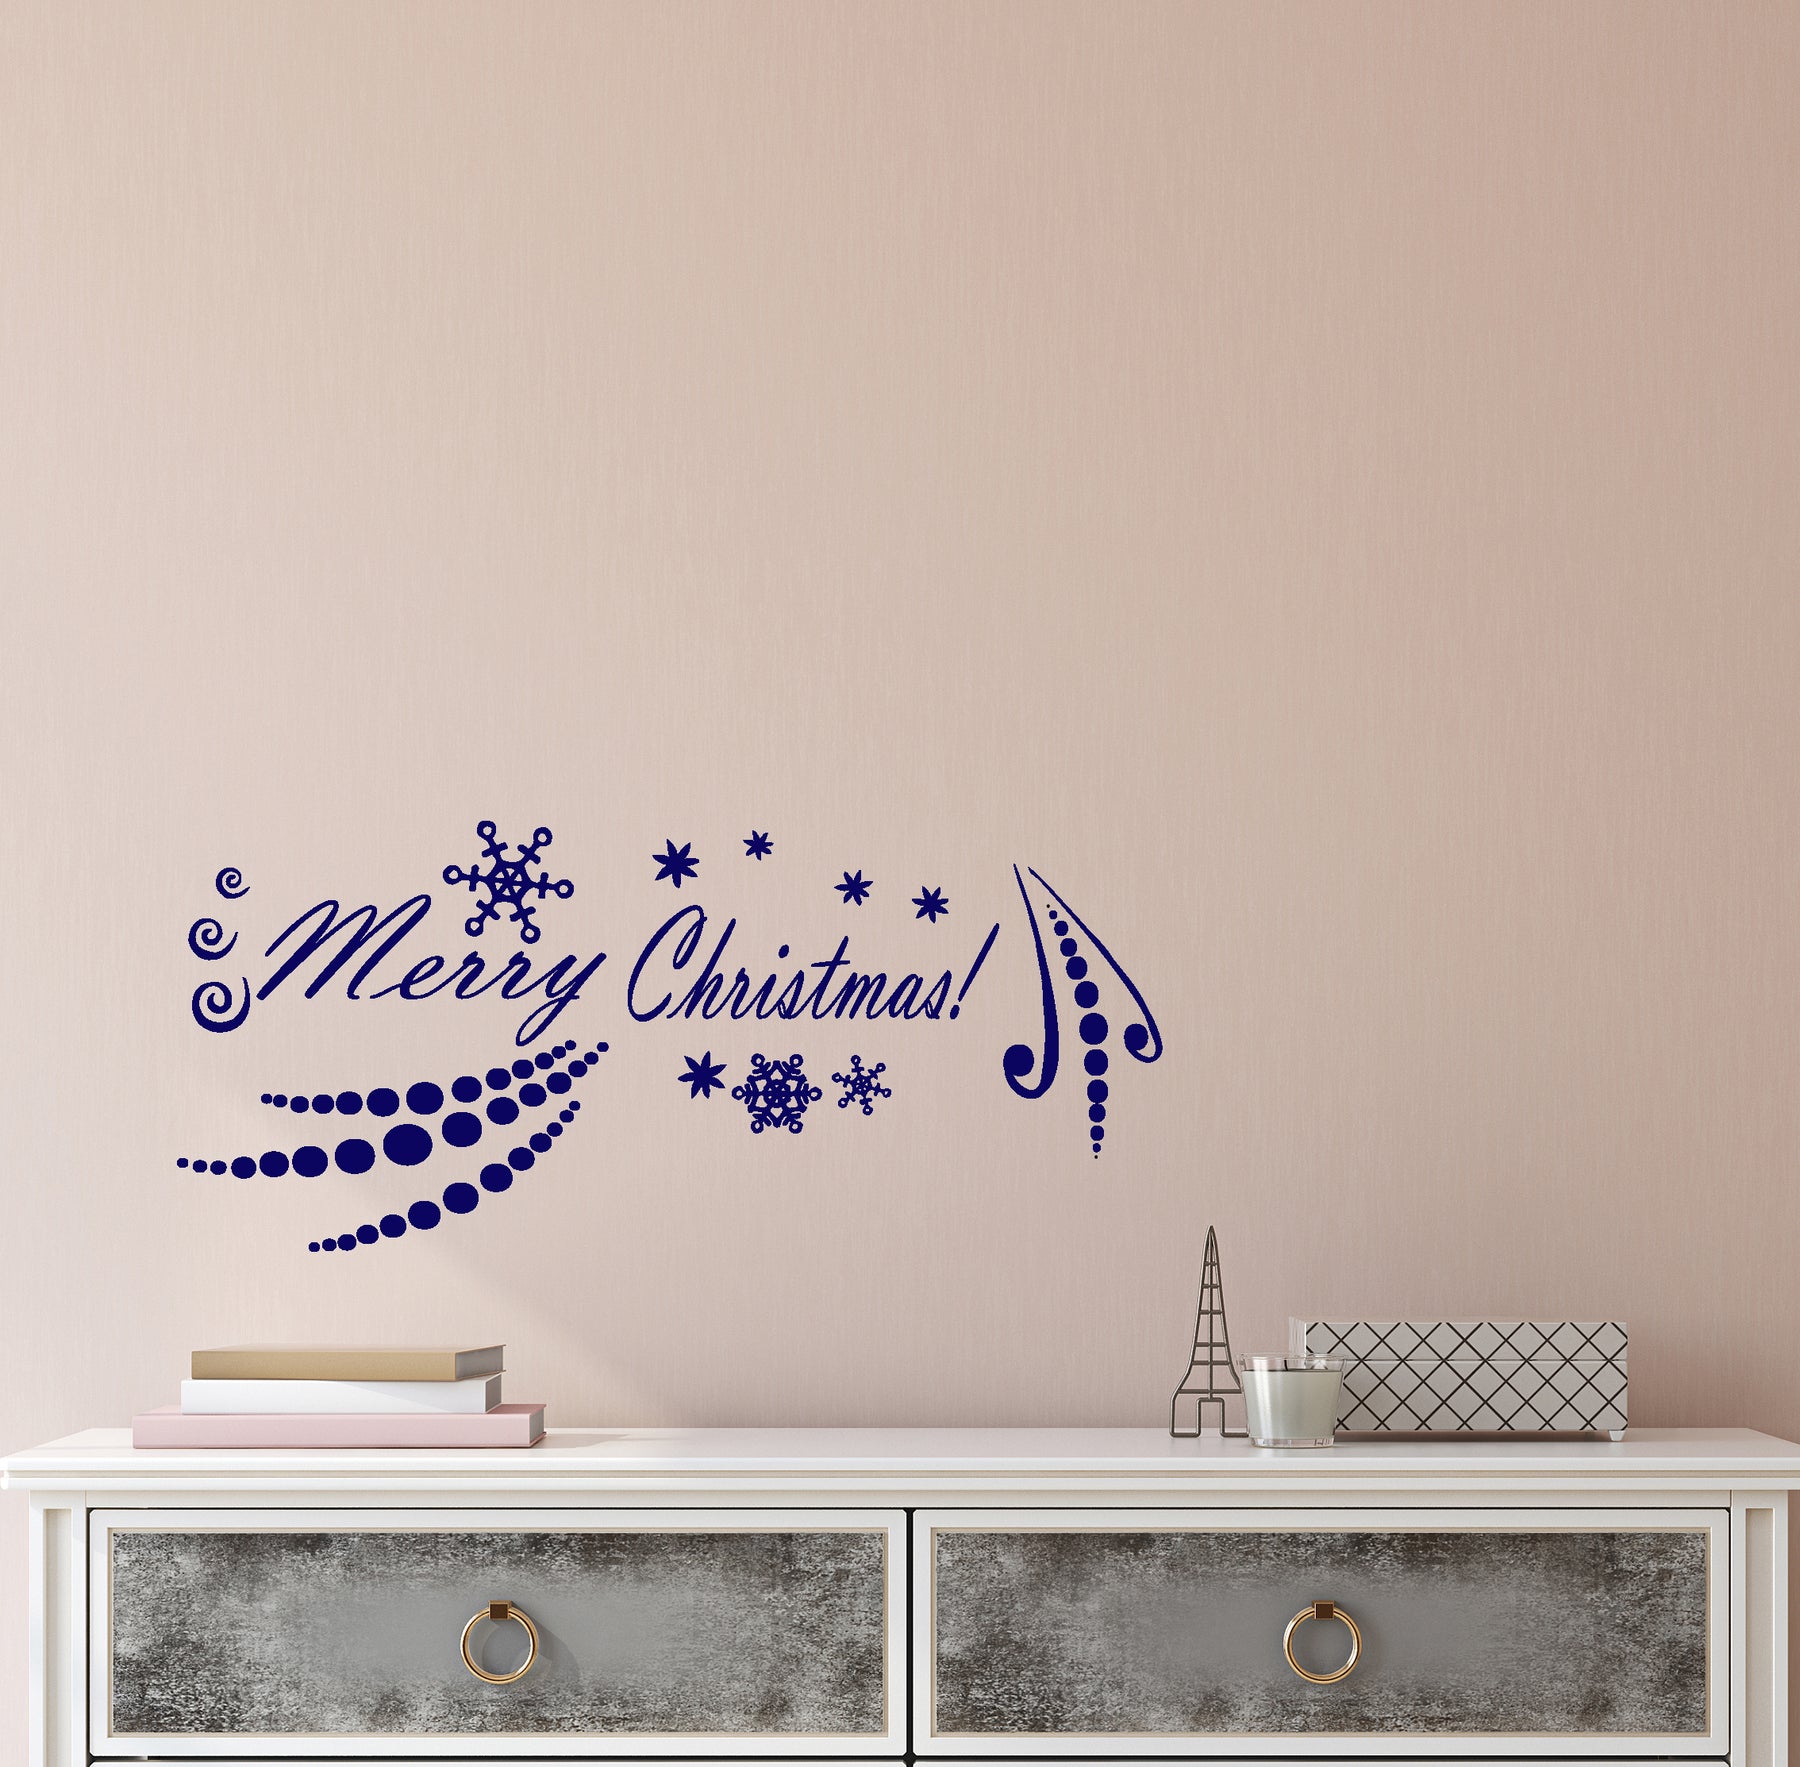 Snowflakes 5 Decal